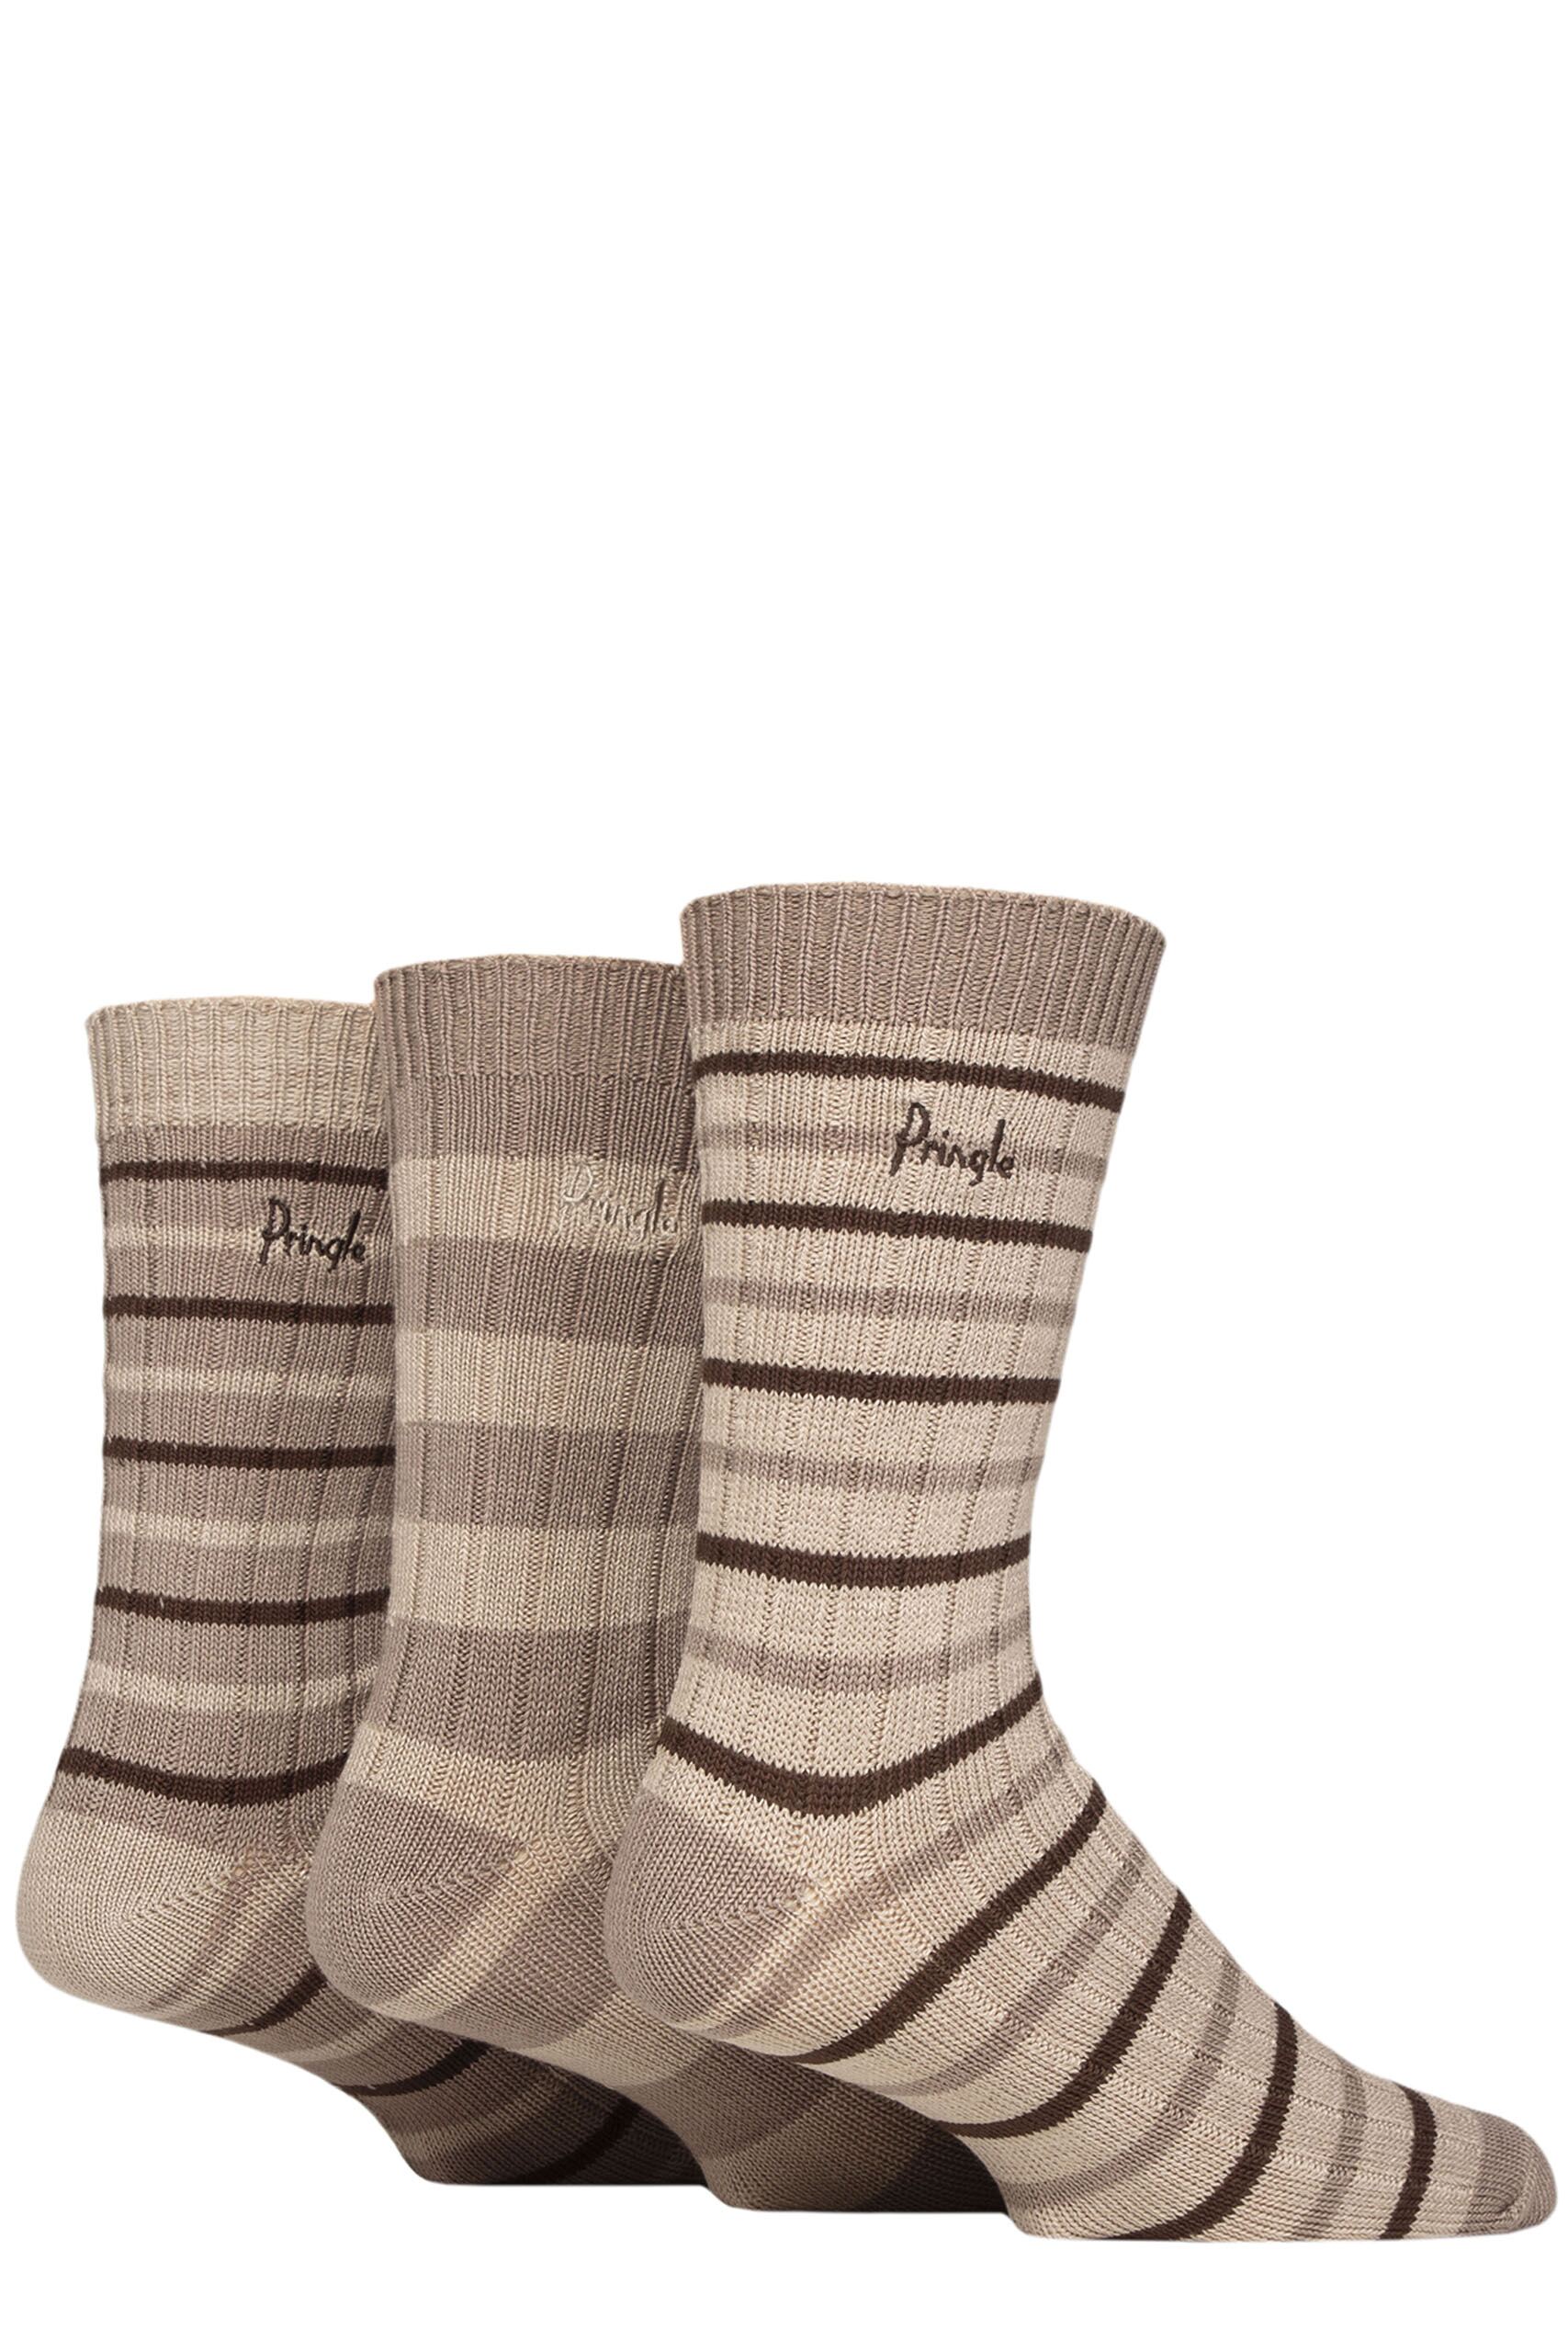 Small Stripes Beige / Brown